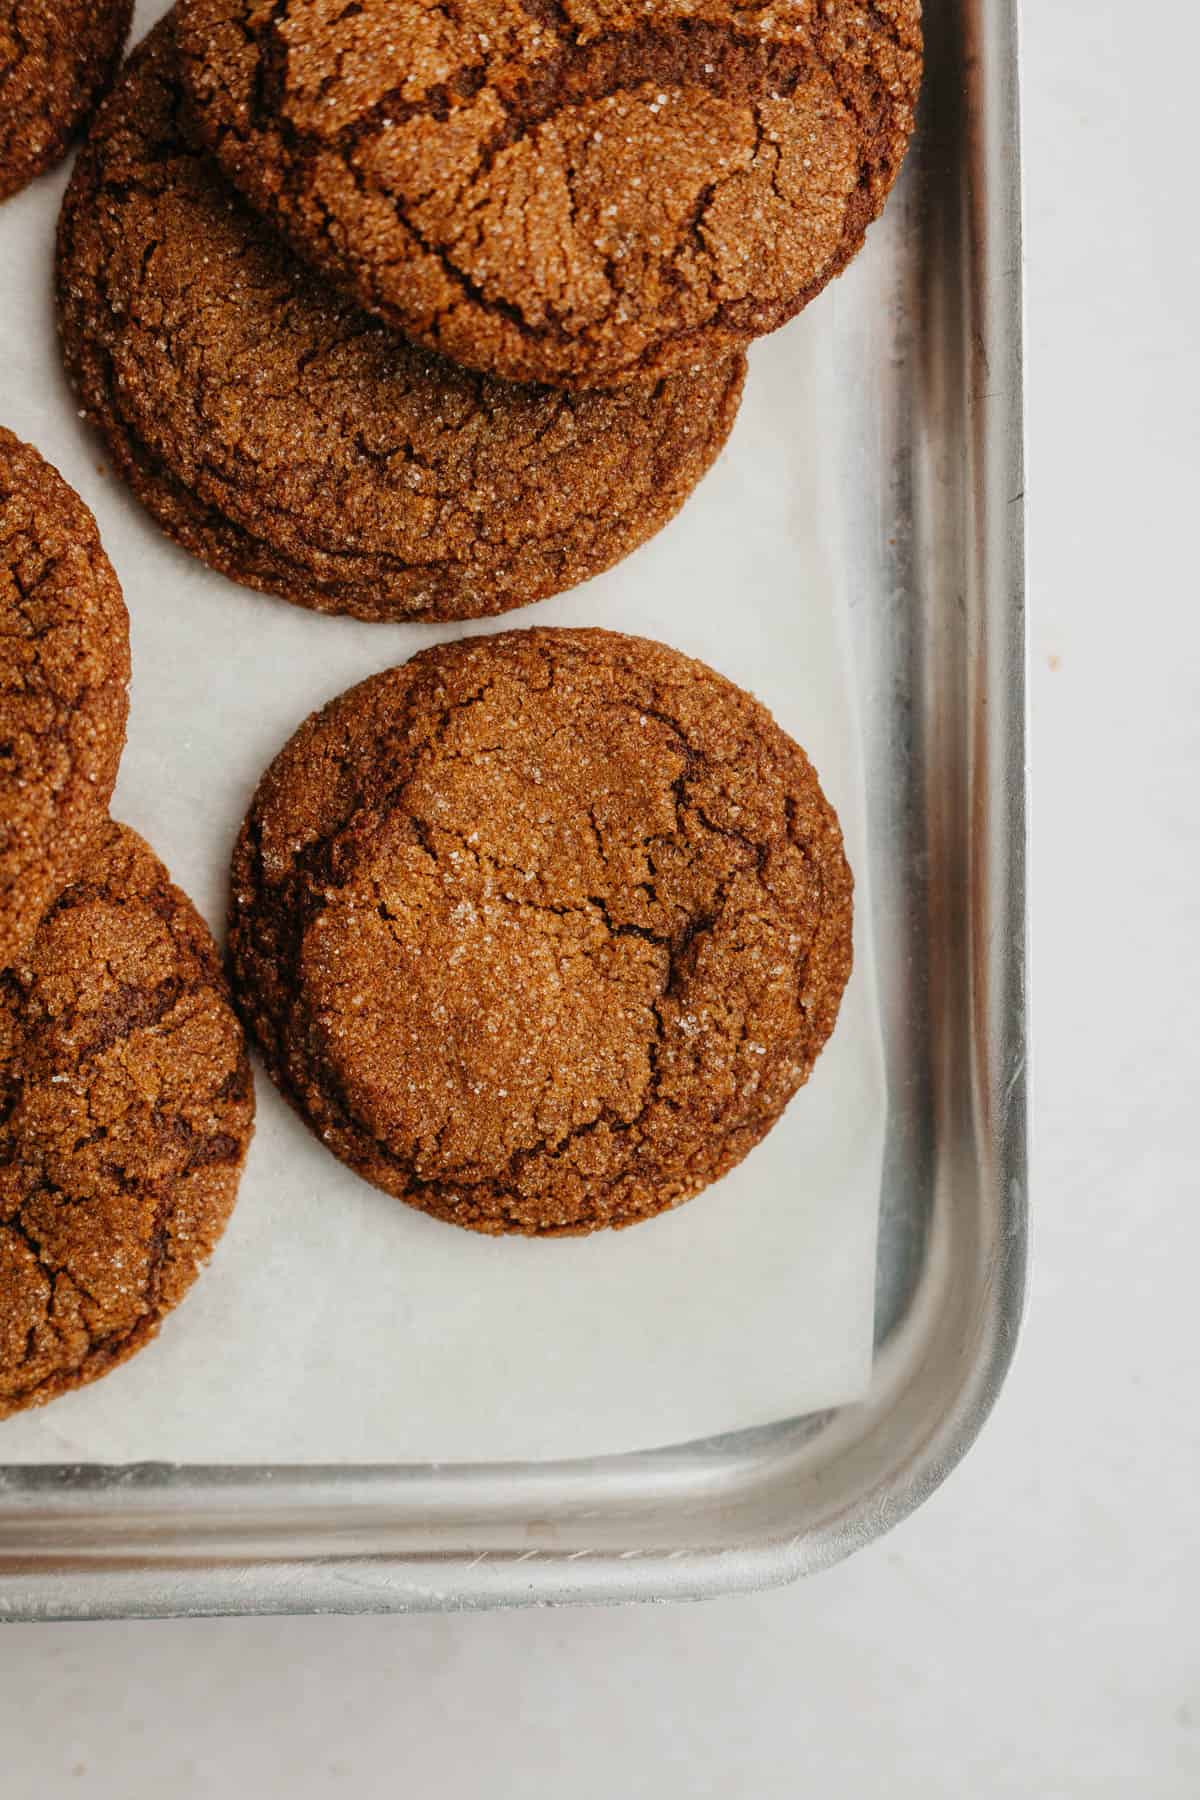 A baking sheet with molasses cookies on it.